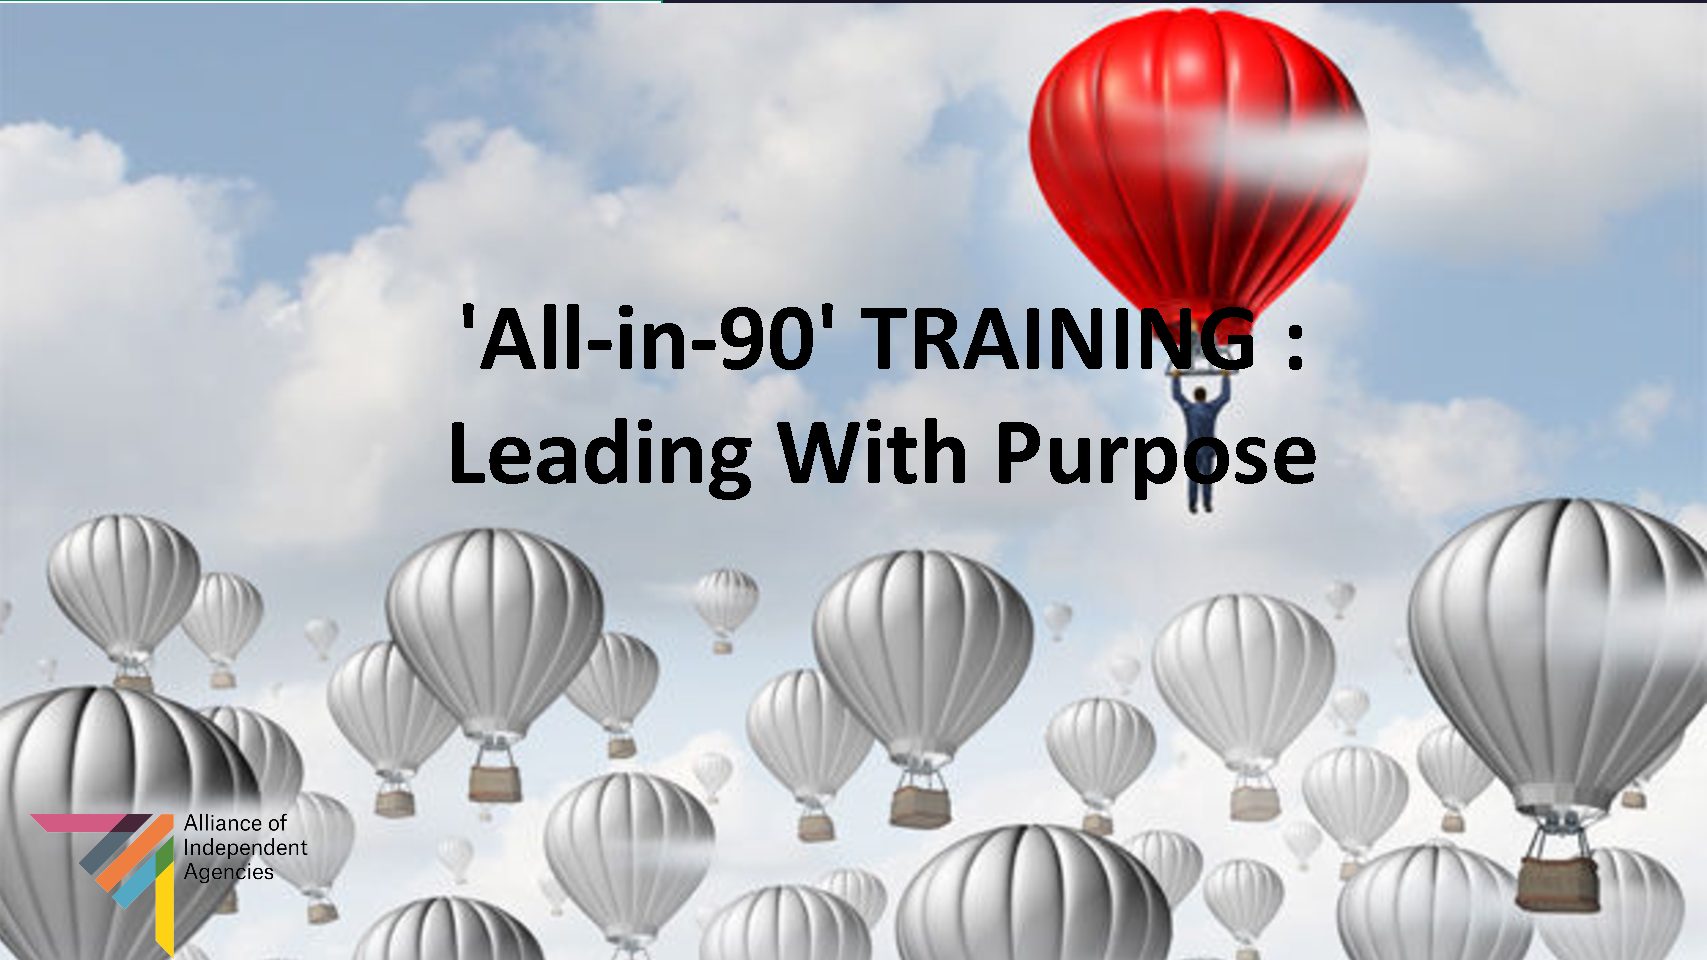 'All-in-90' TRAINING : Leading With Purpose